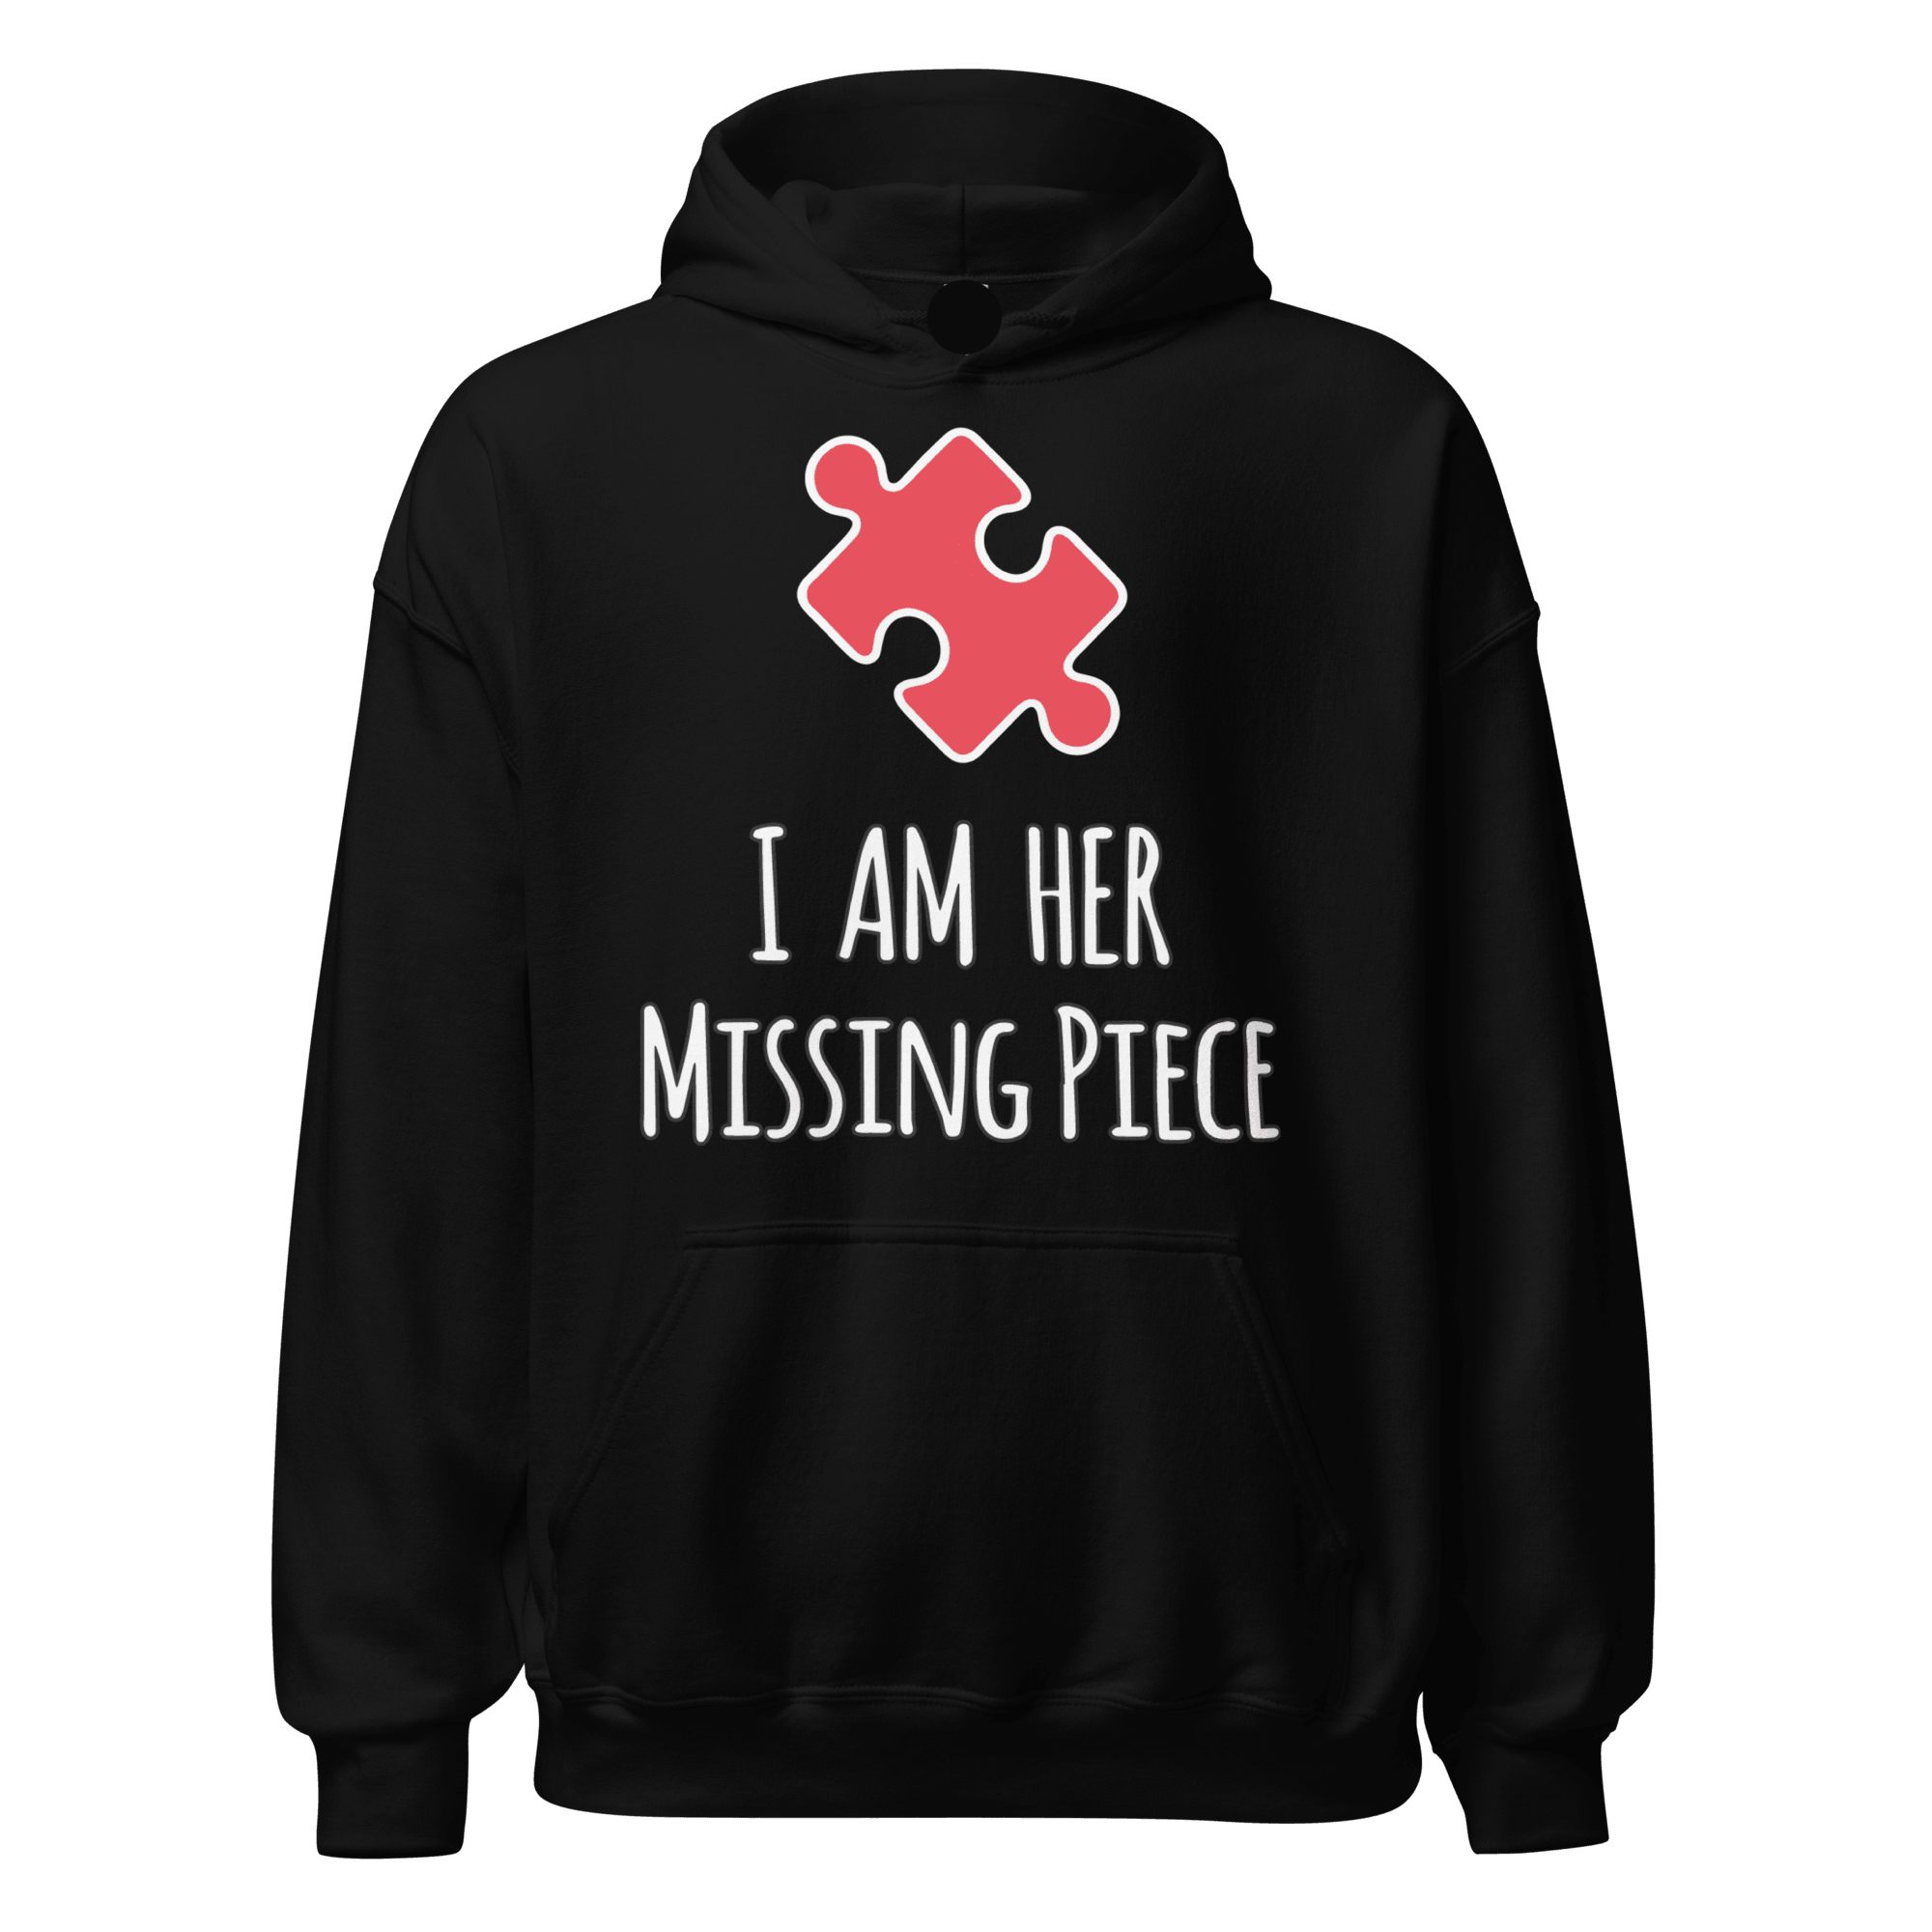 I am His Missing Puzzle Piece I am Her Missing Puzzle piece Couples Hoodie Set - TopKoalaTee